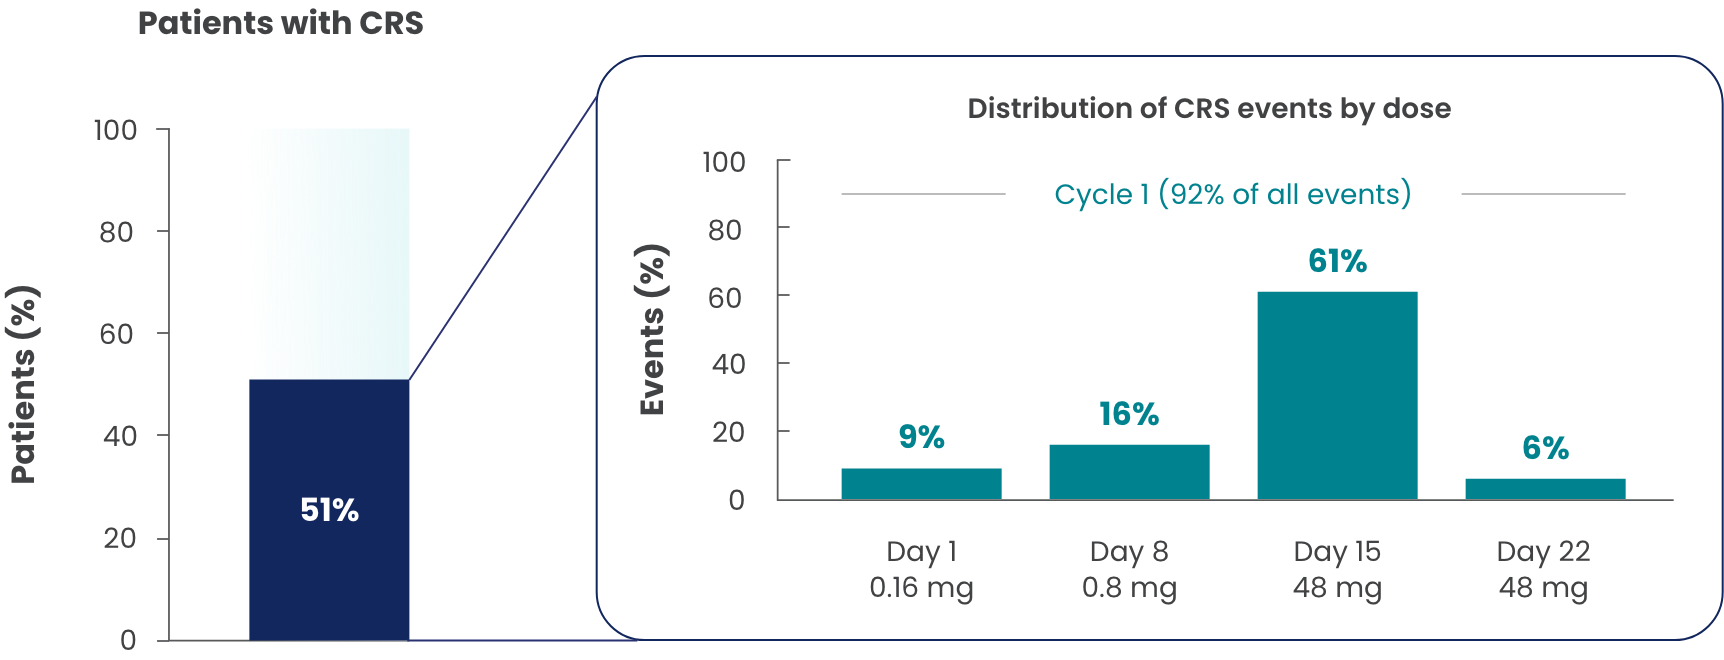 51% of patients receiving EPKINLY™ who experienced CRS events during cycle 1 (92% of all events).